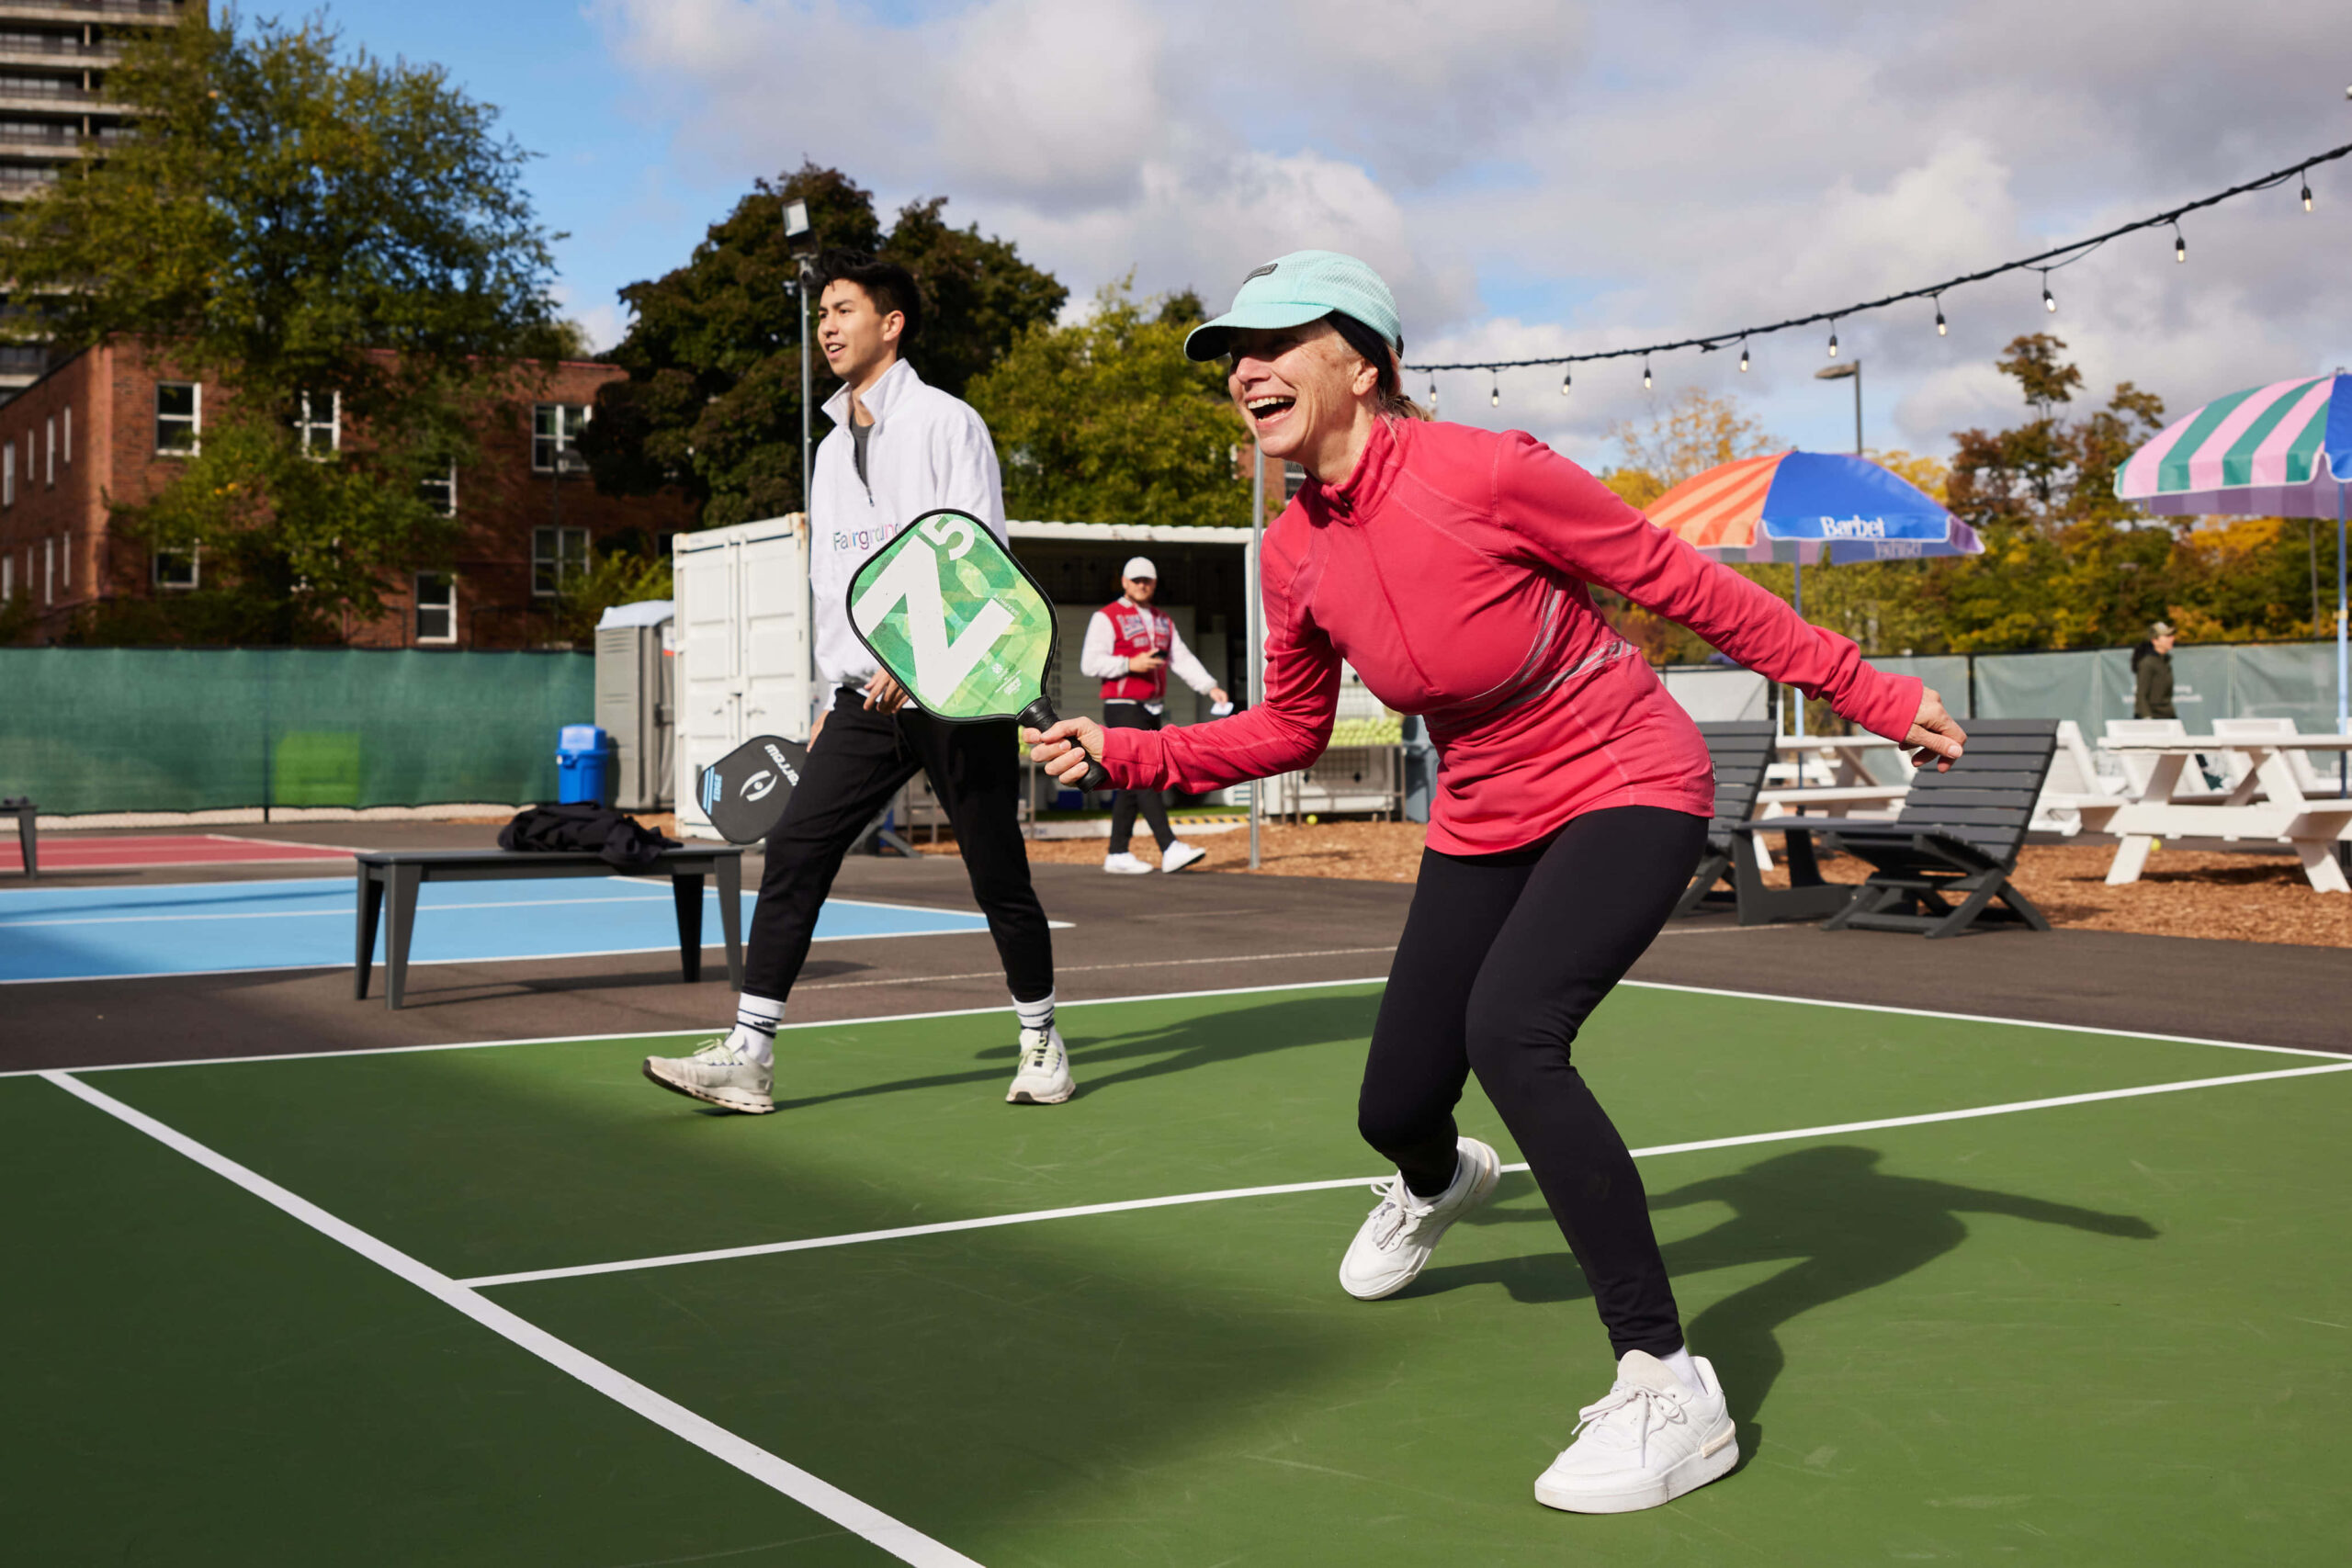 Why Pickleball is Gaining Popularity